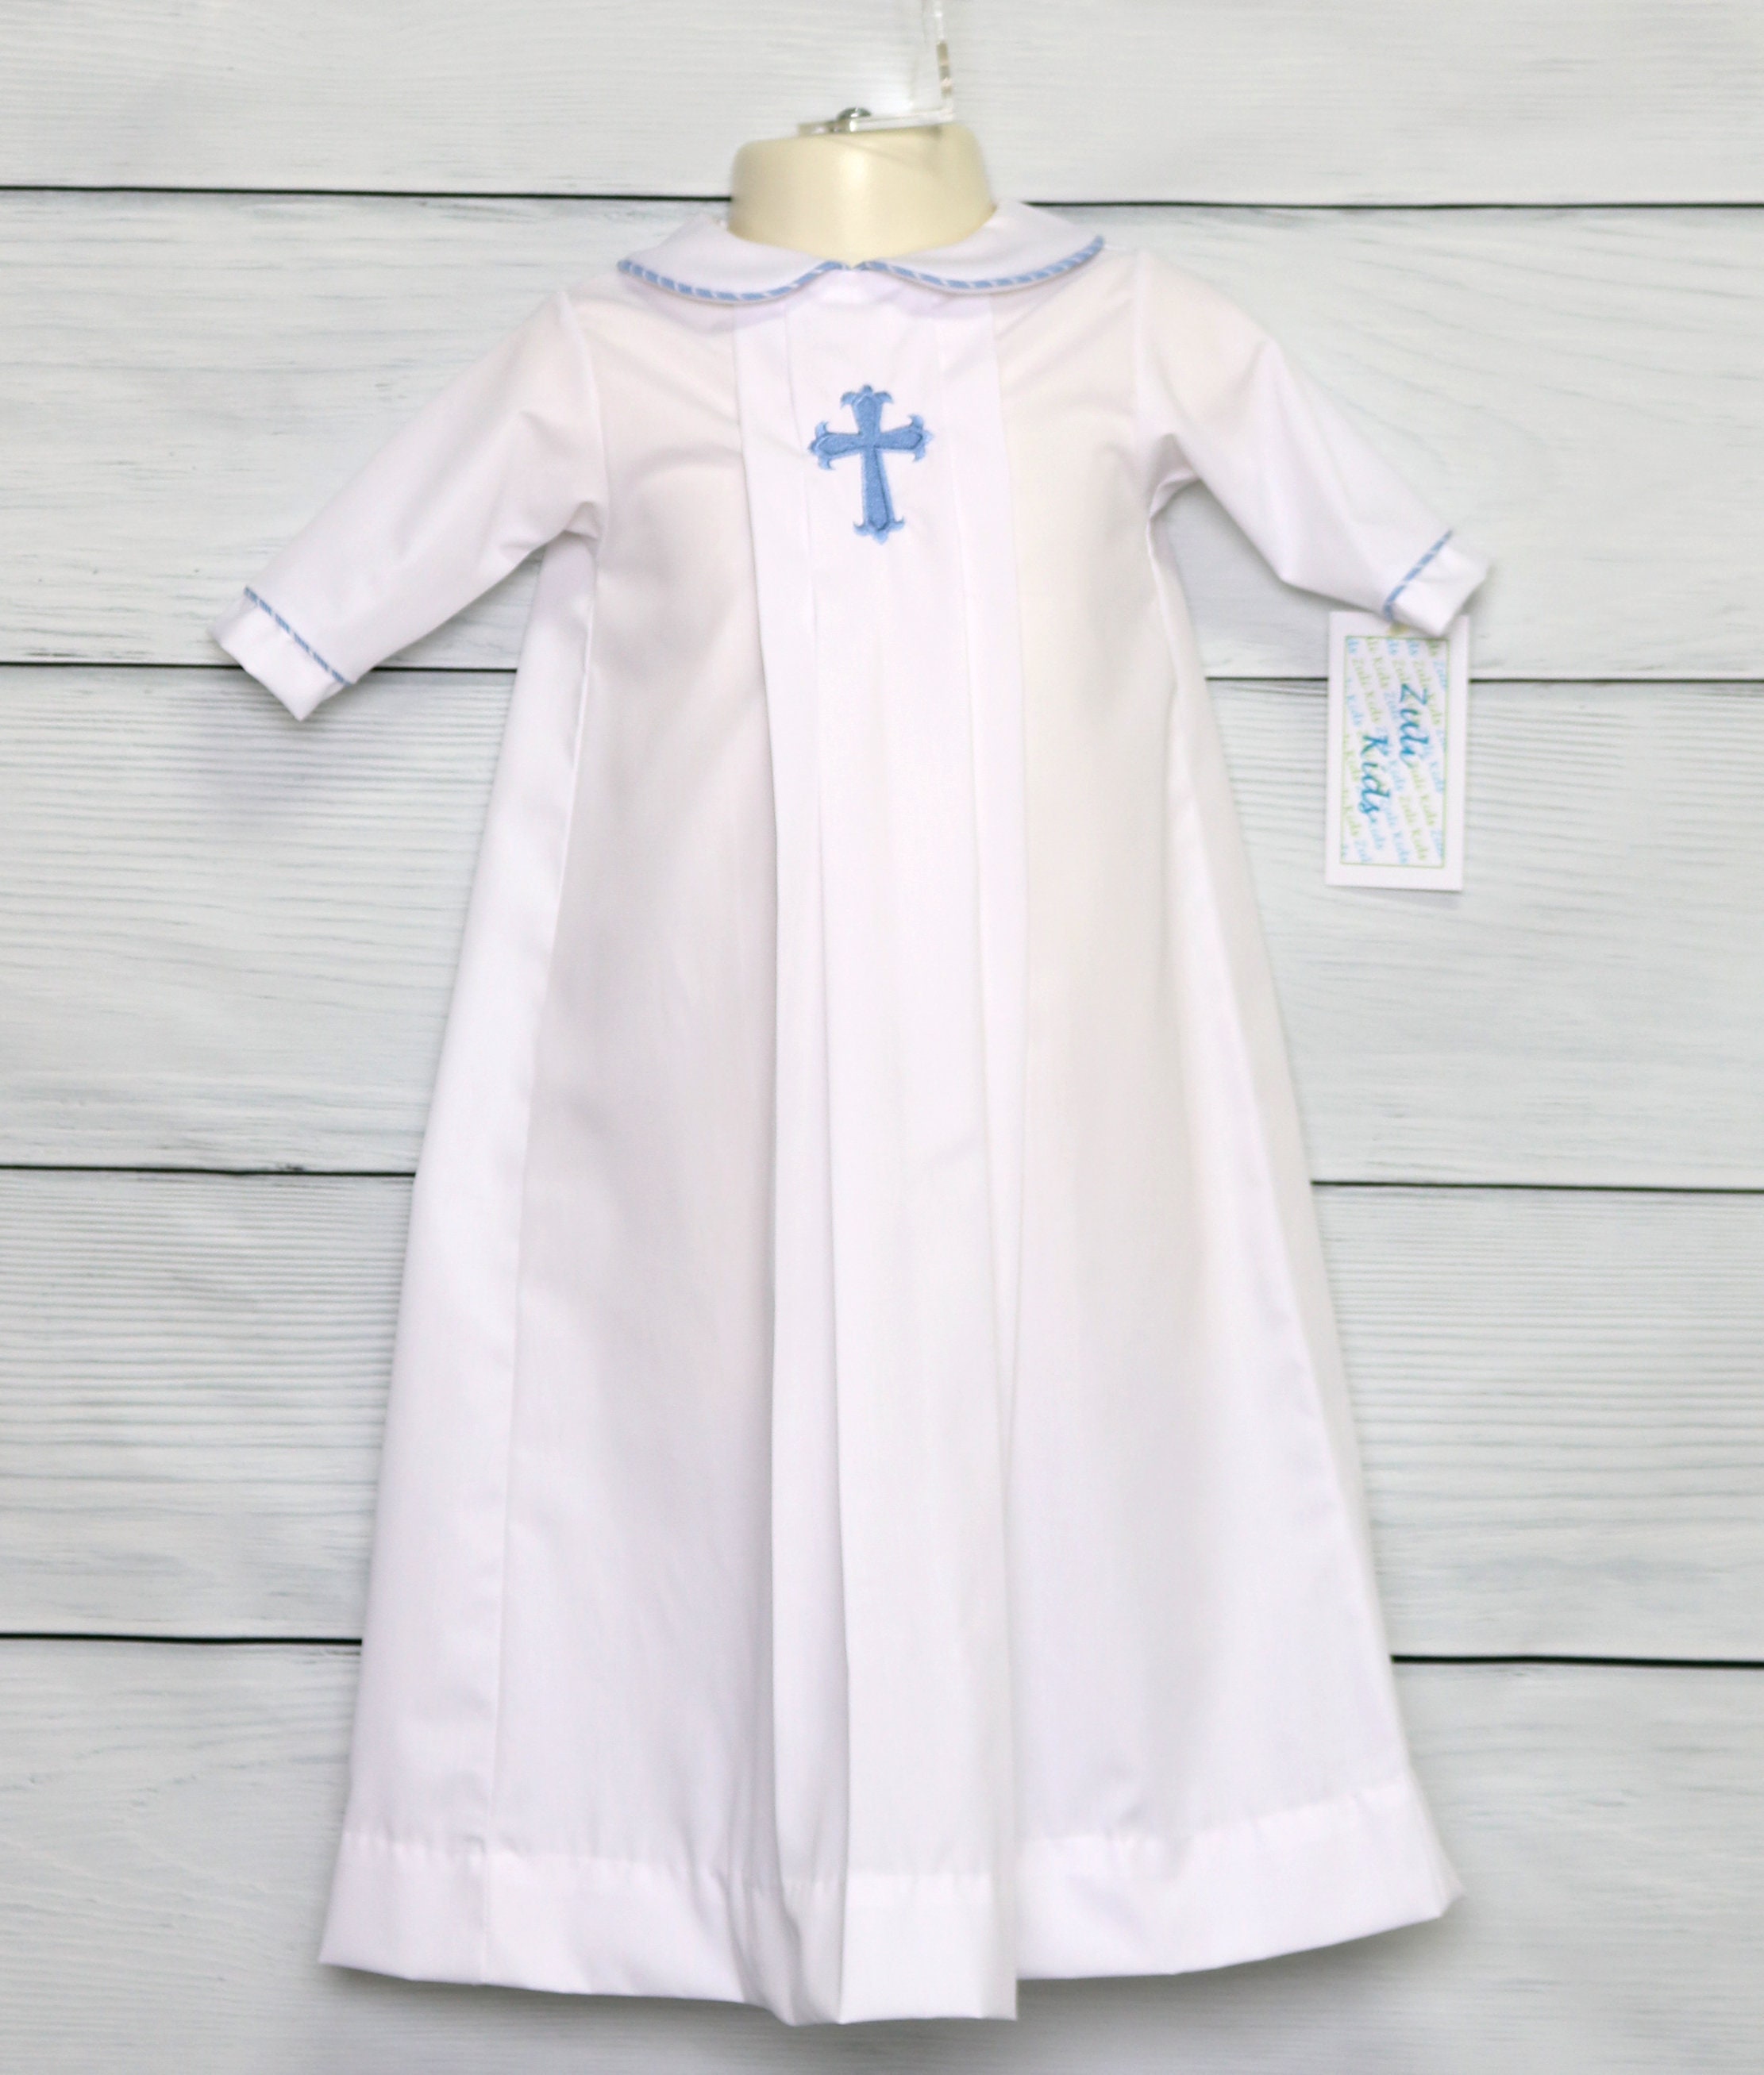 Christening Gown Boys Baptism Outfit Christening Gowns | Etsy